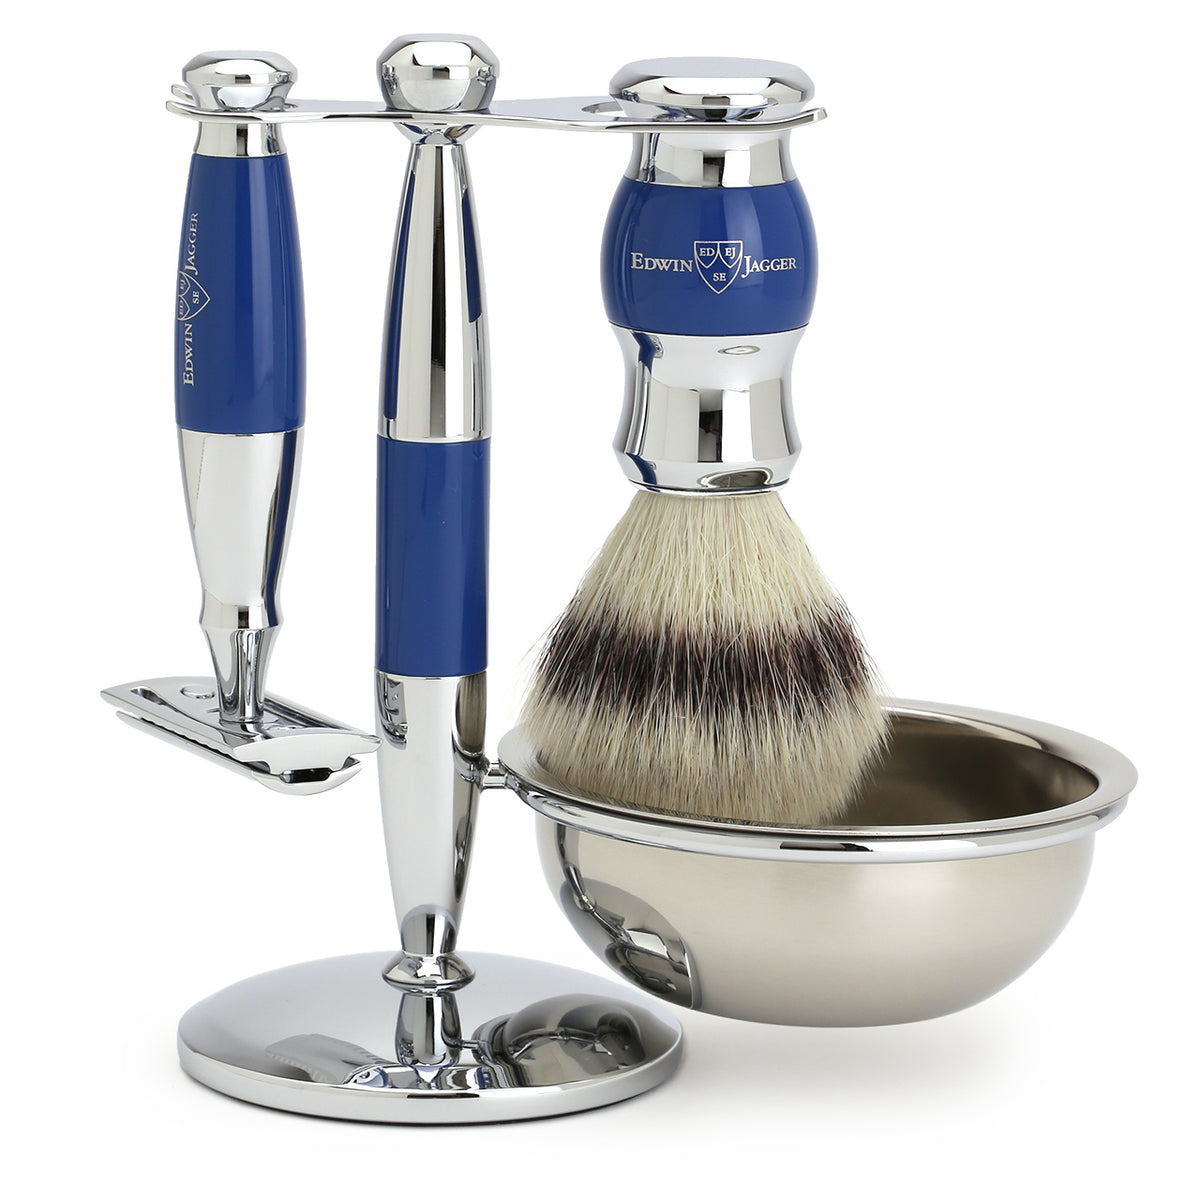 Edwin Jagger Shaving Set with Shaving Brush, Safety Razor, Stand and Bowl - Blue